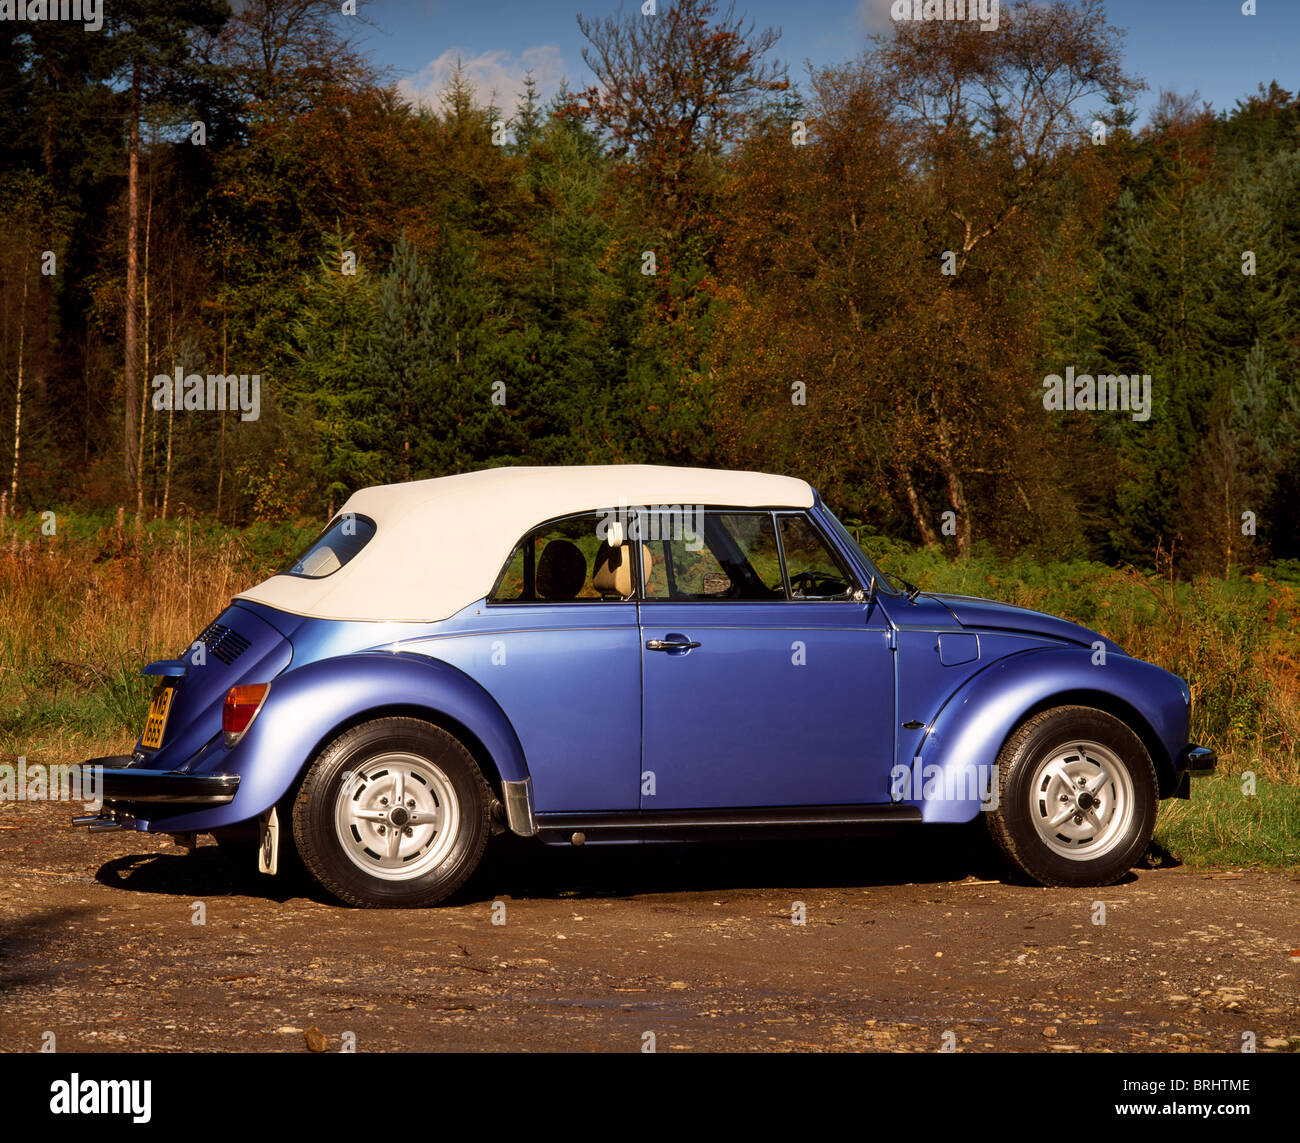 1975 VW Beetle 1303 Cabriolet parked on country road, side view, roof up Stock Photo